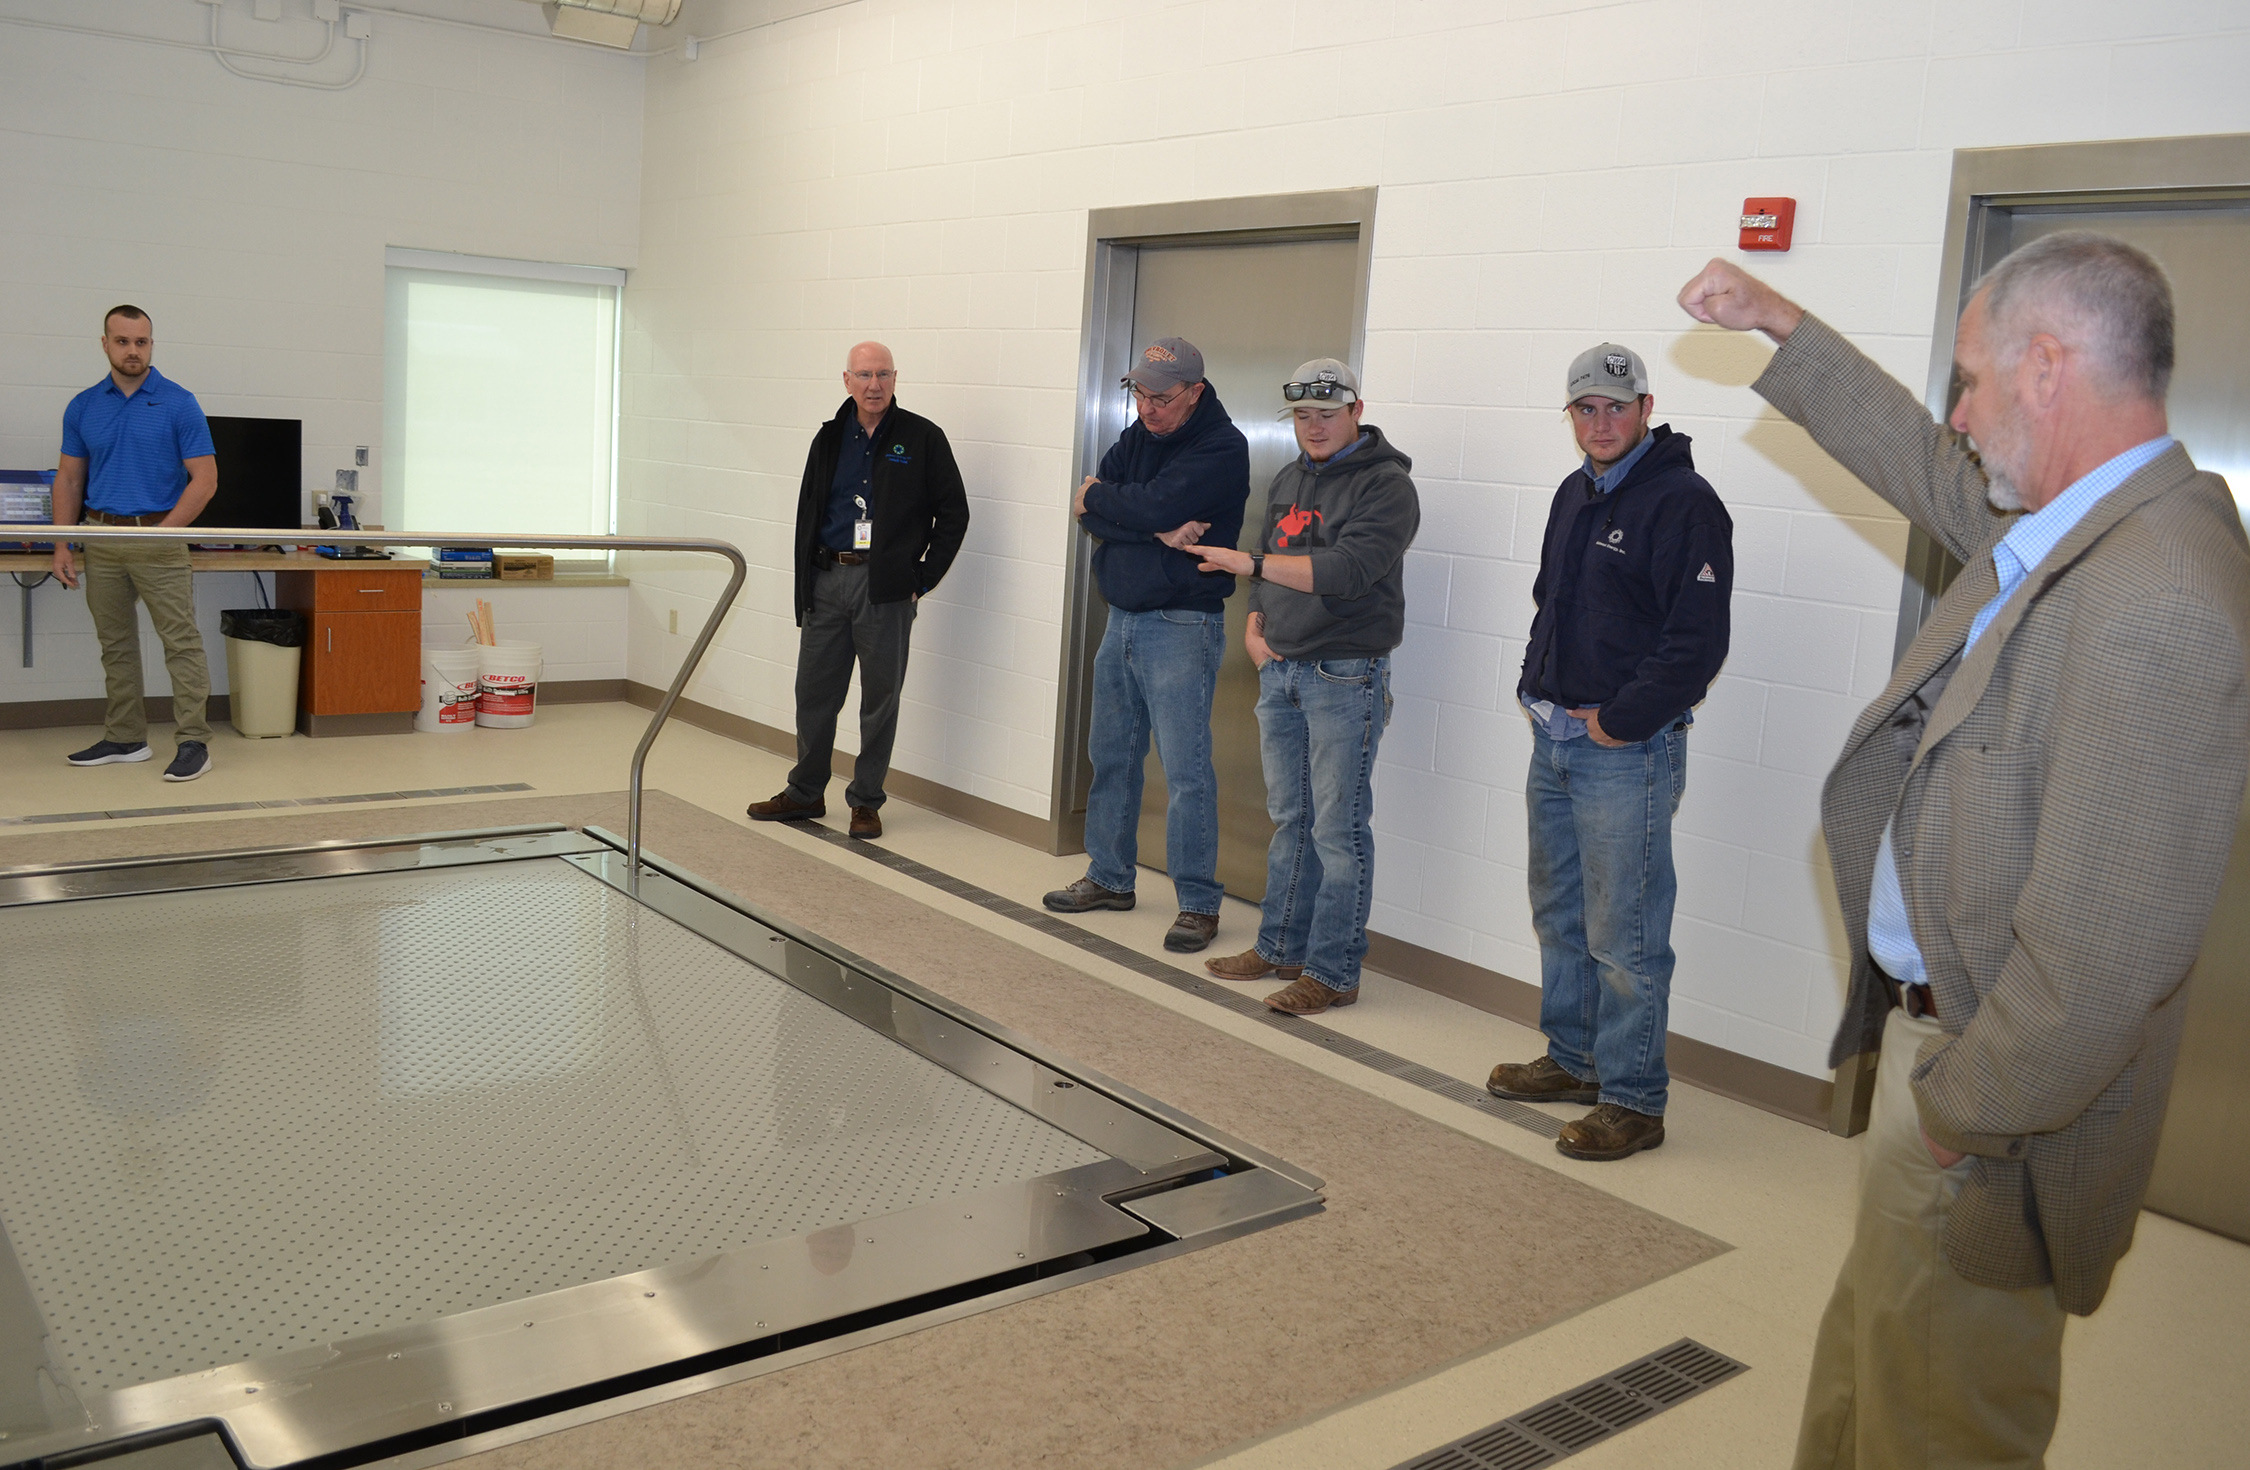 Five men look at a zero-entry physical therapy pool at the Rooks County Health Center in Plainville, Kansas, while one man explains its operation.